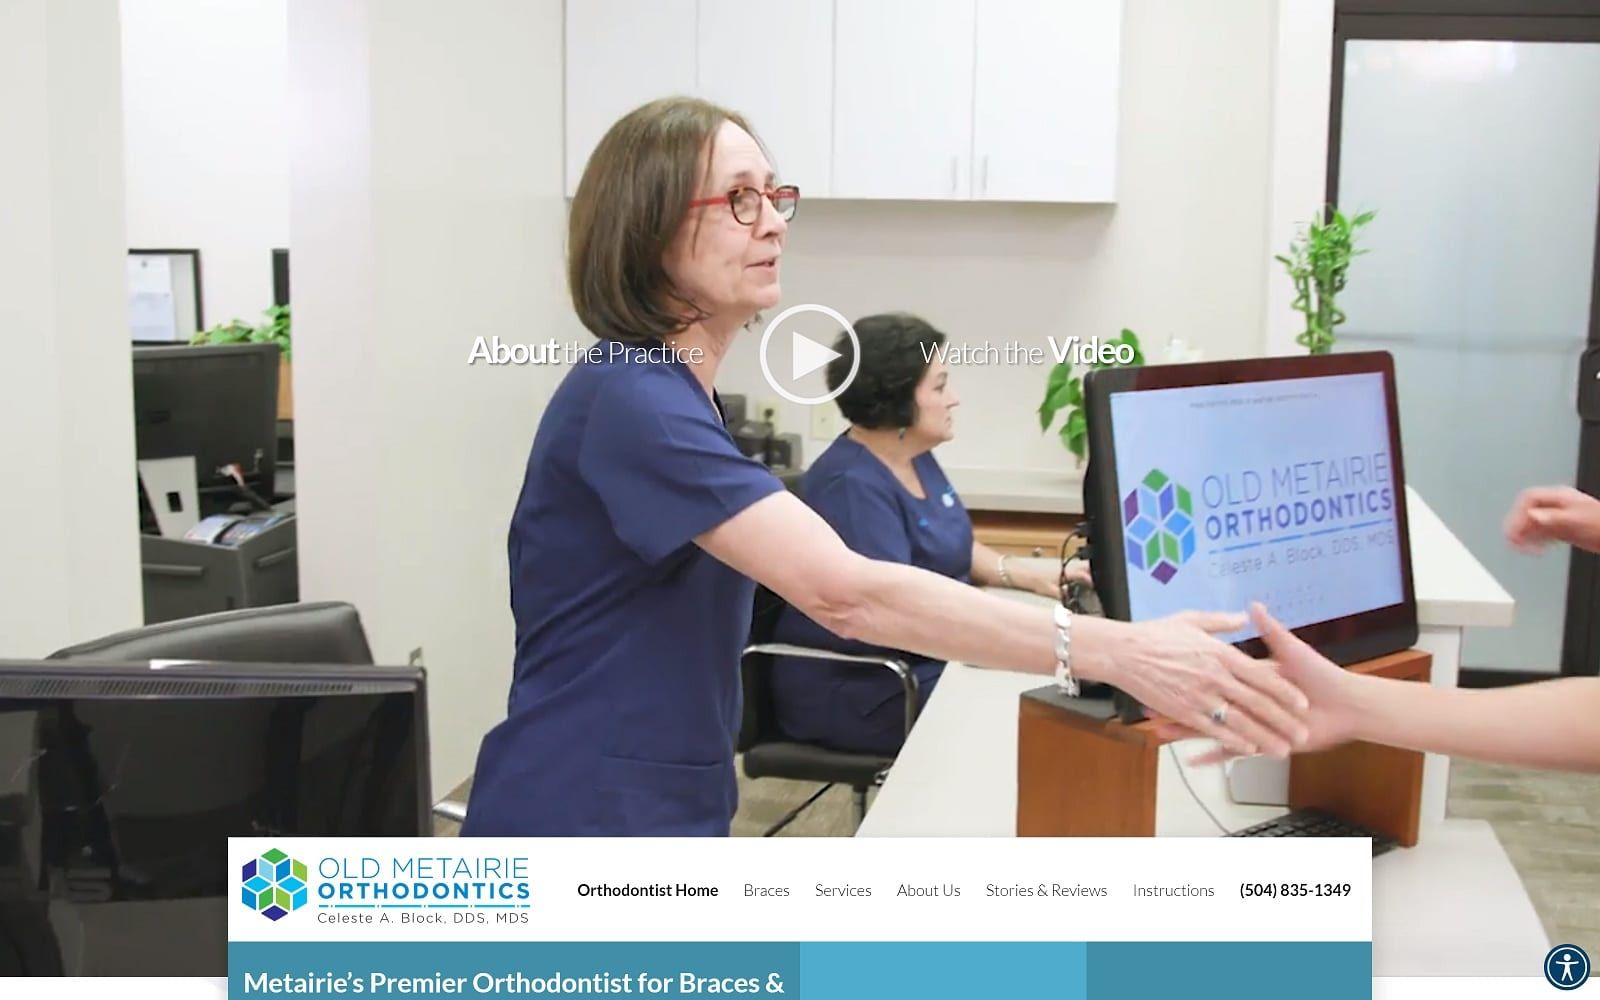 The screenshot of old metairie orthodontics: dr. Celeste a. Block, dds, mds oldmetairieortho. Com website